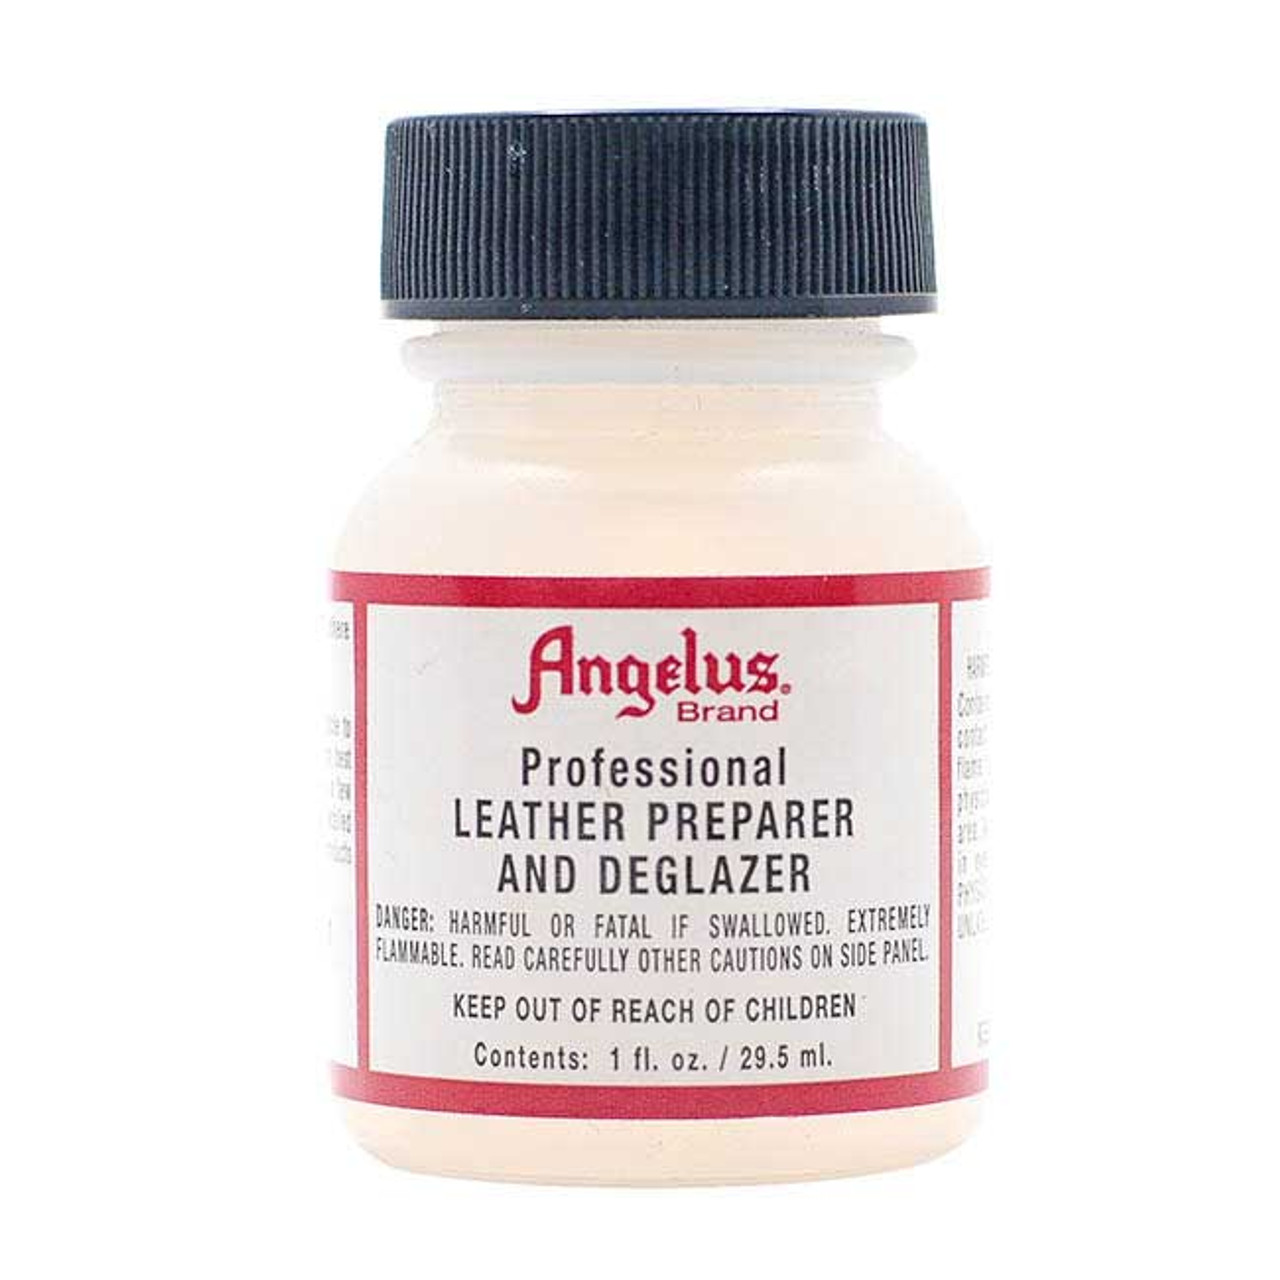 Angelus Leather Paint 1oz White - Wet Paint Artists' Materials and Framing